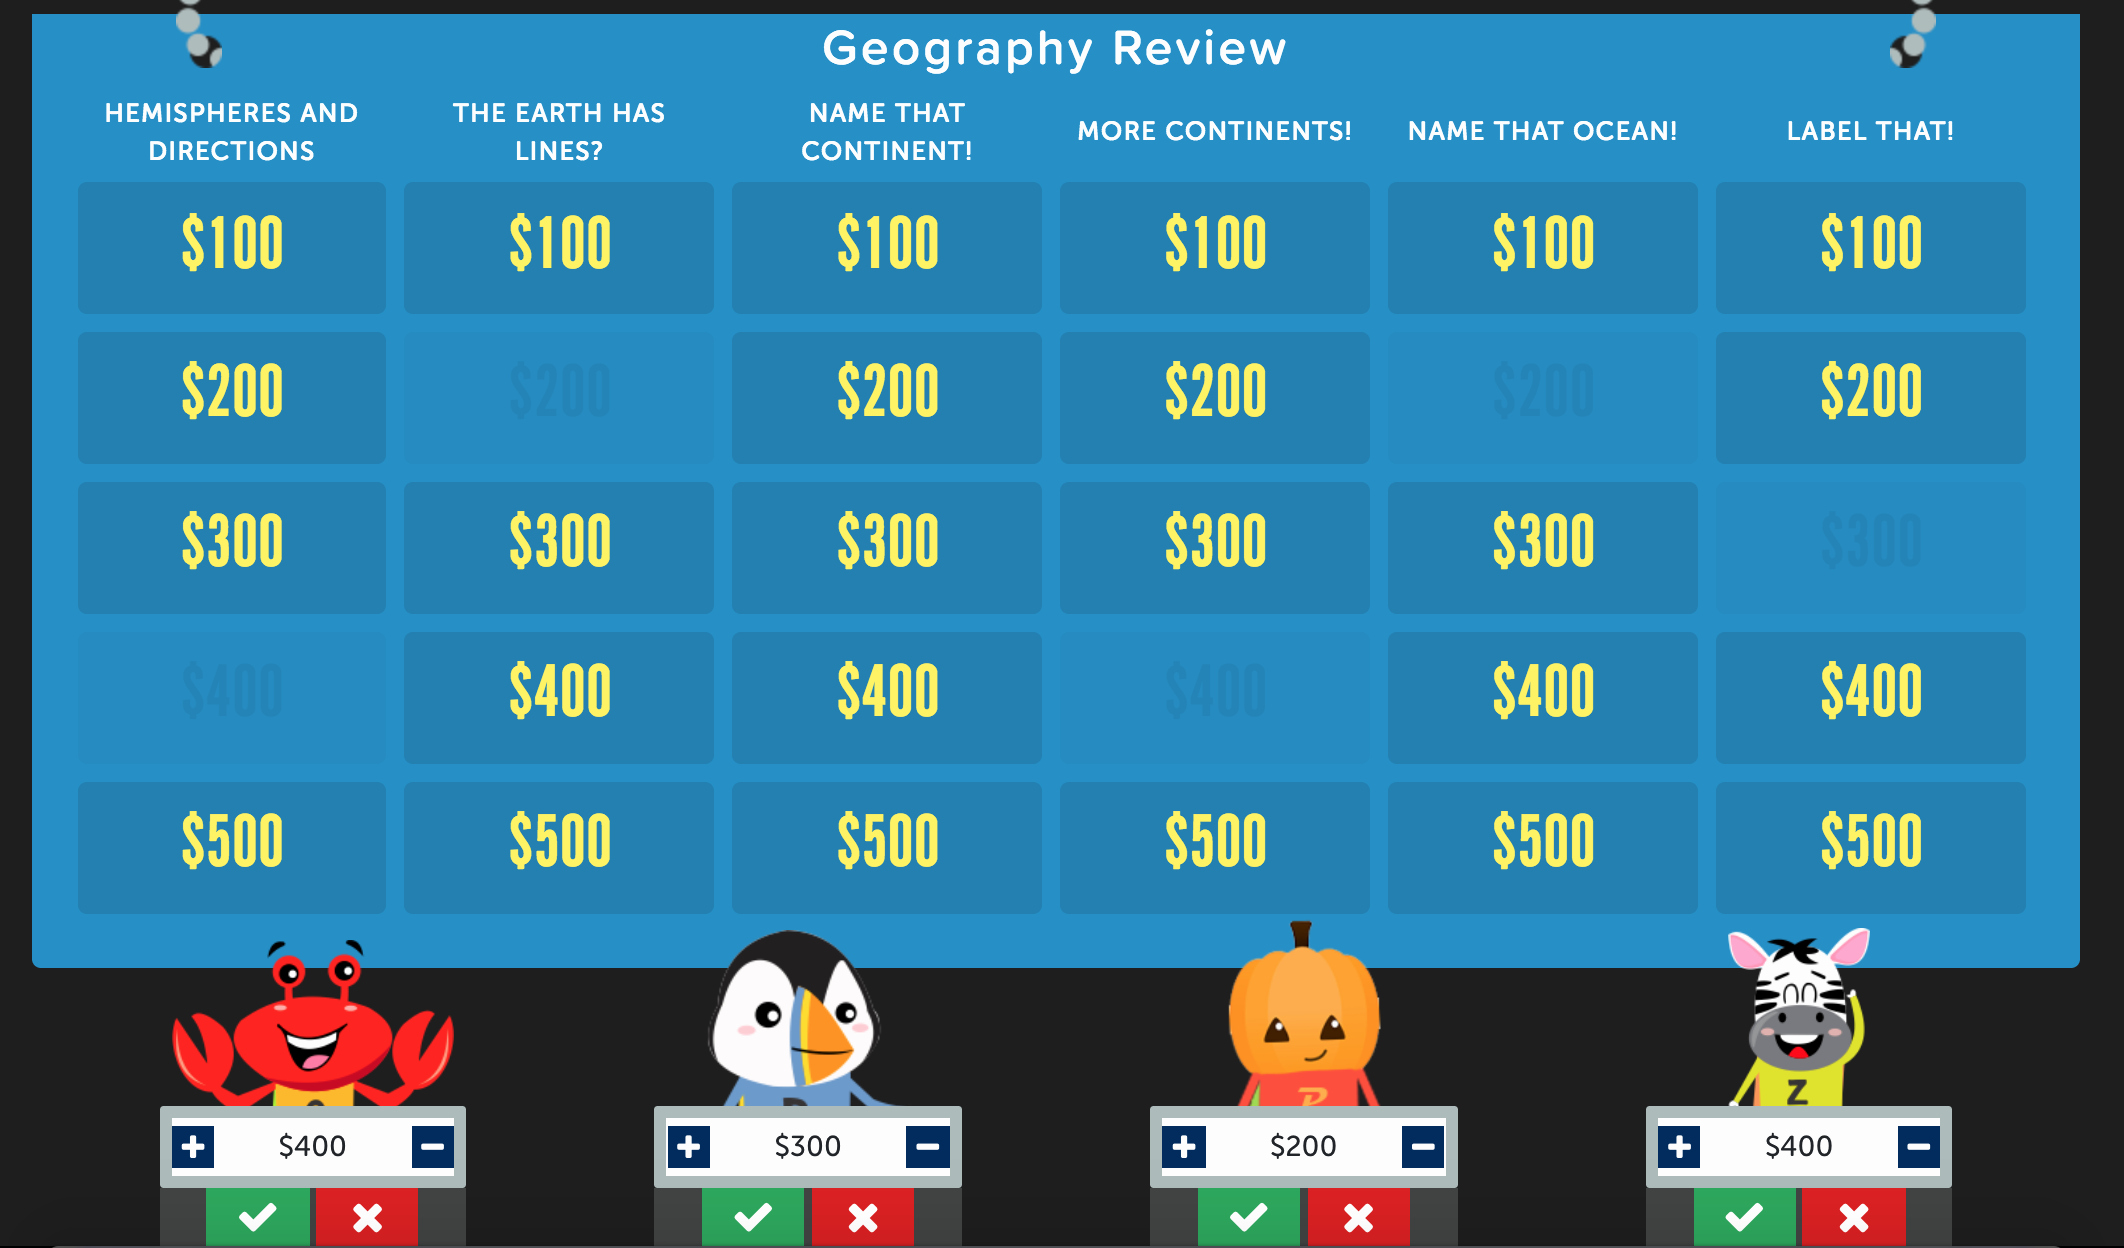 Jeopardy Game for Classrooms Lovely Factile 1 Jeopardy Classroom Review Game